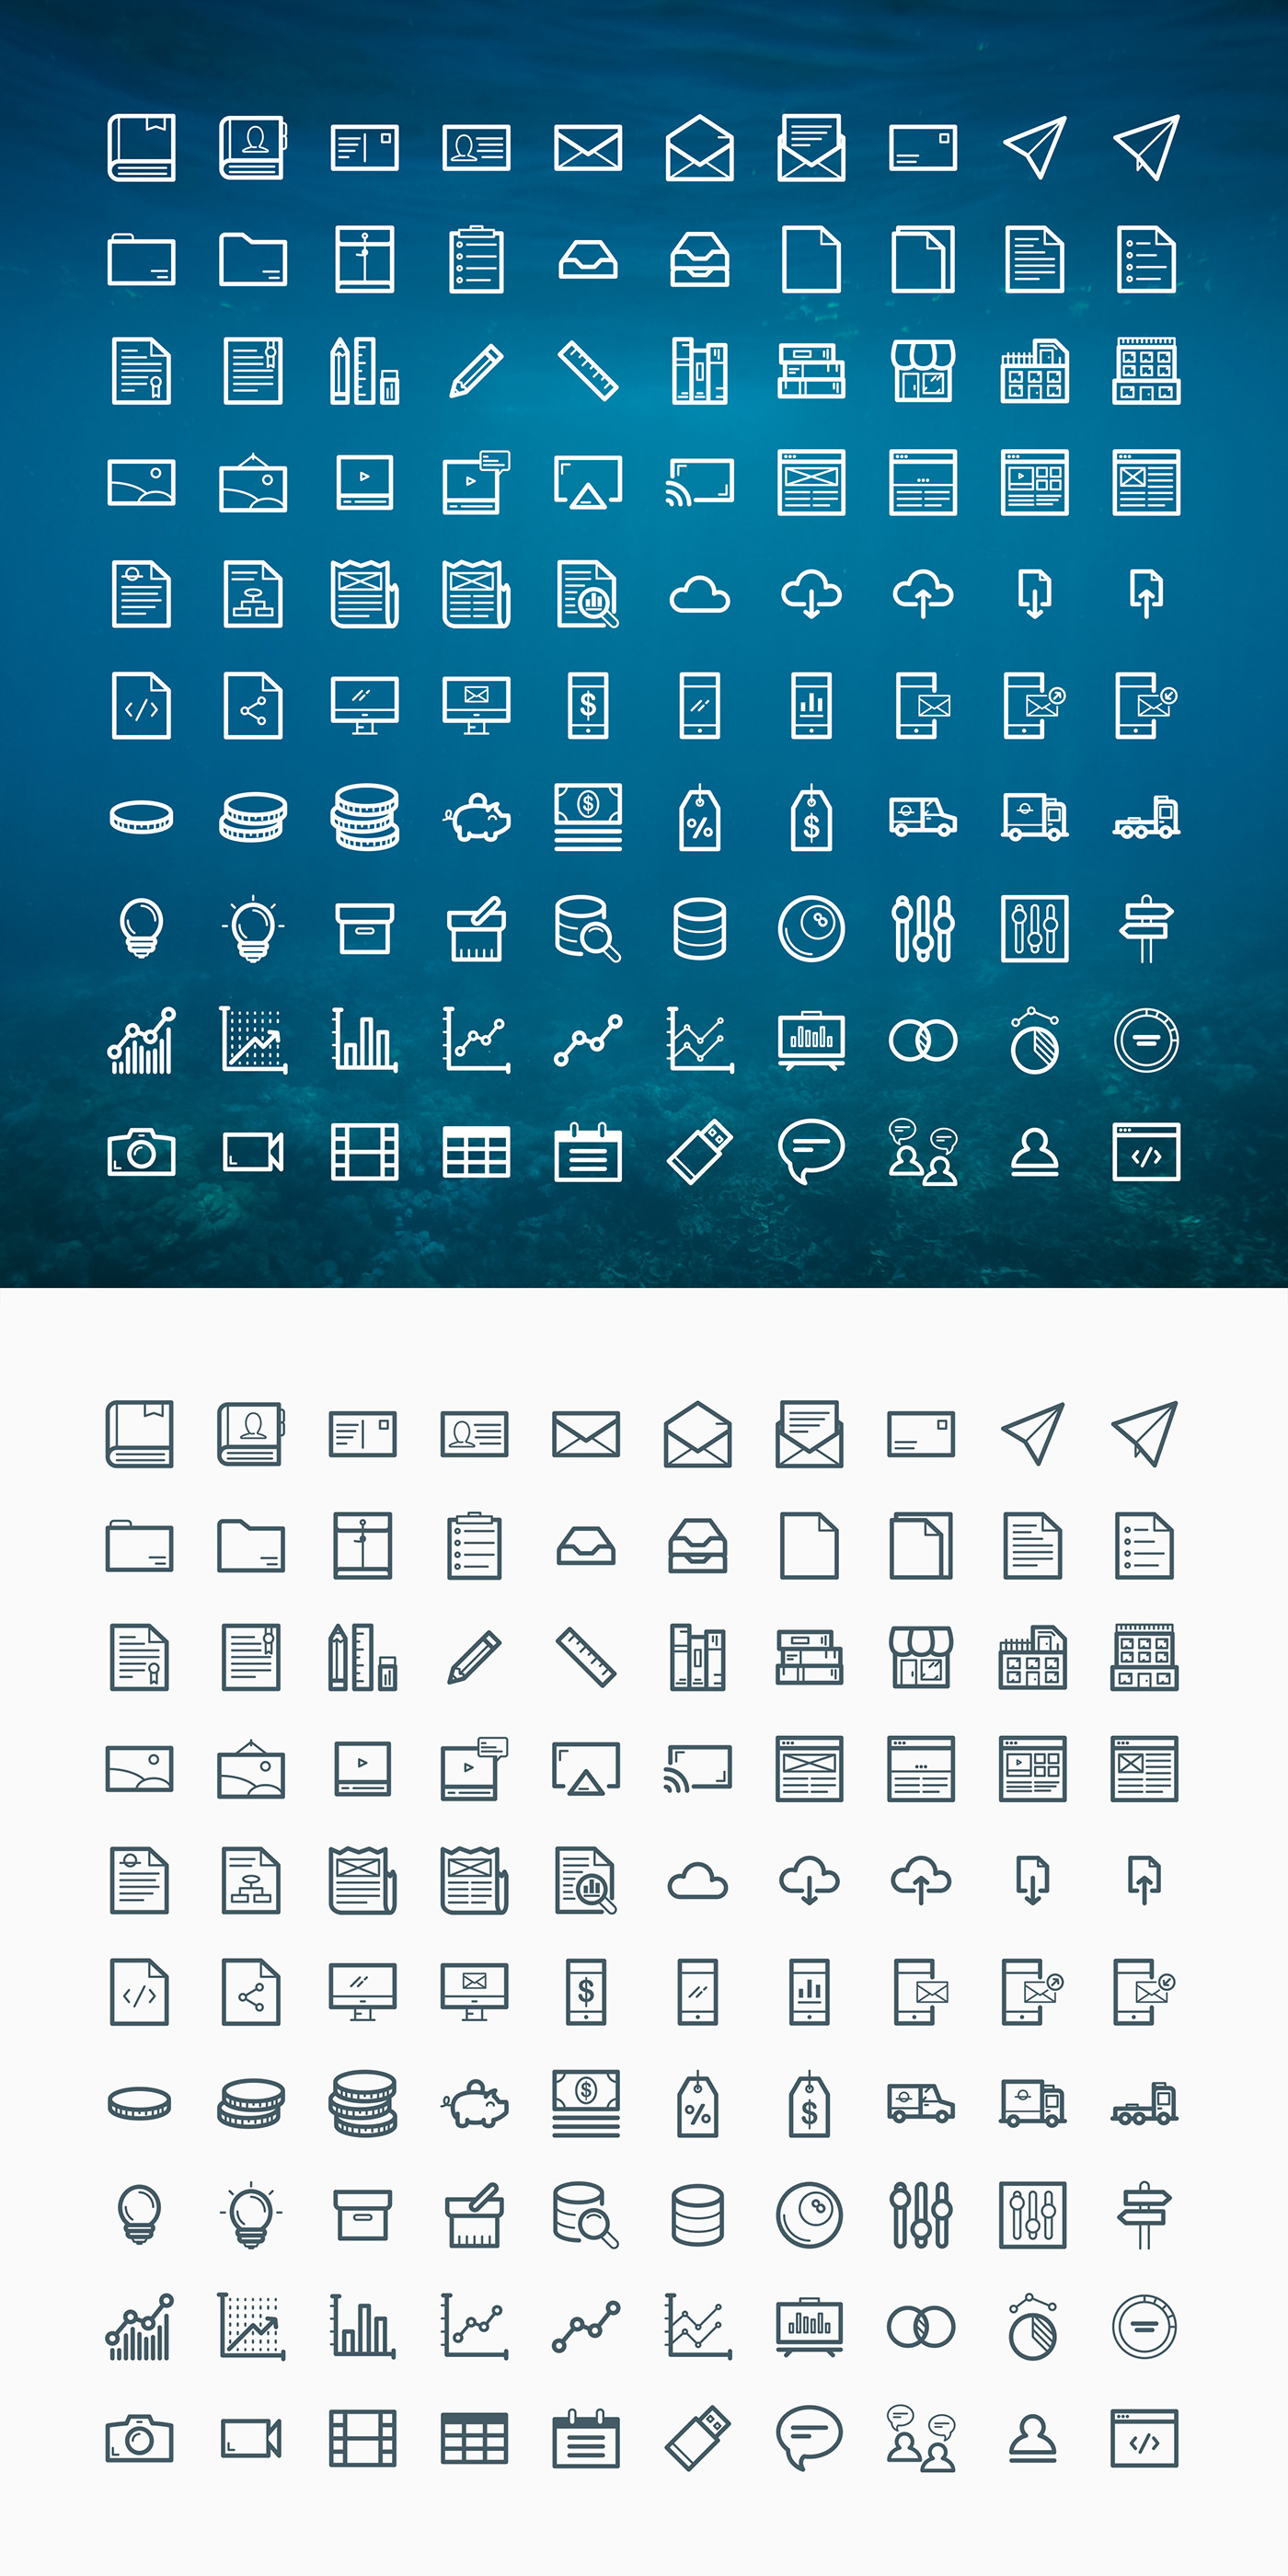 icons free icons annual report icons annual report svg icons icon font